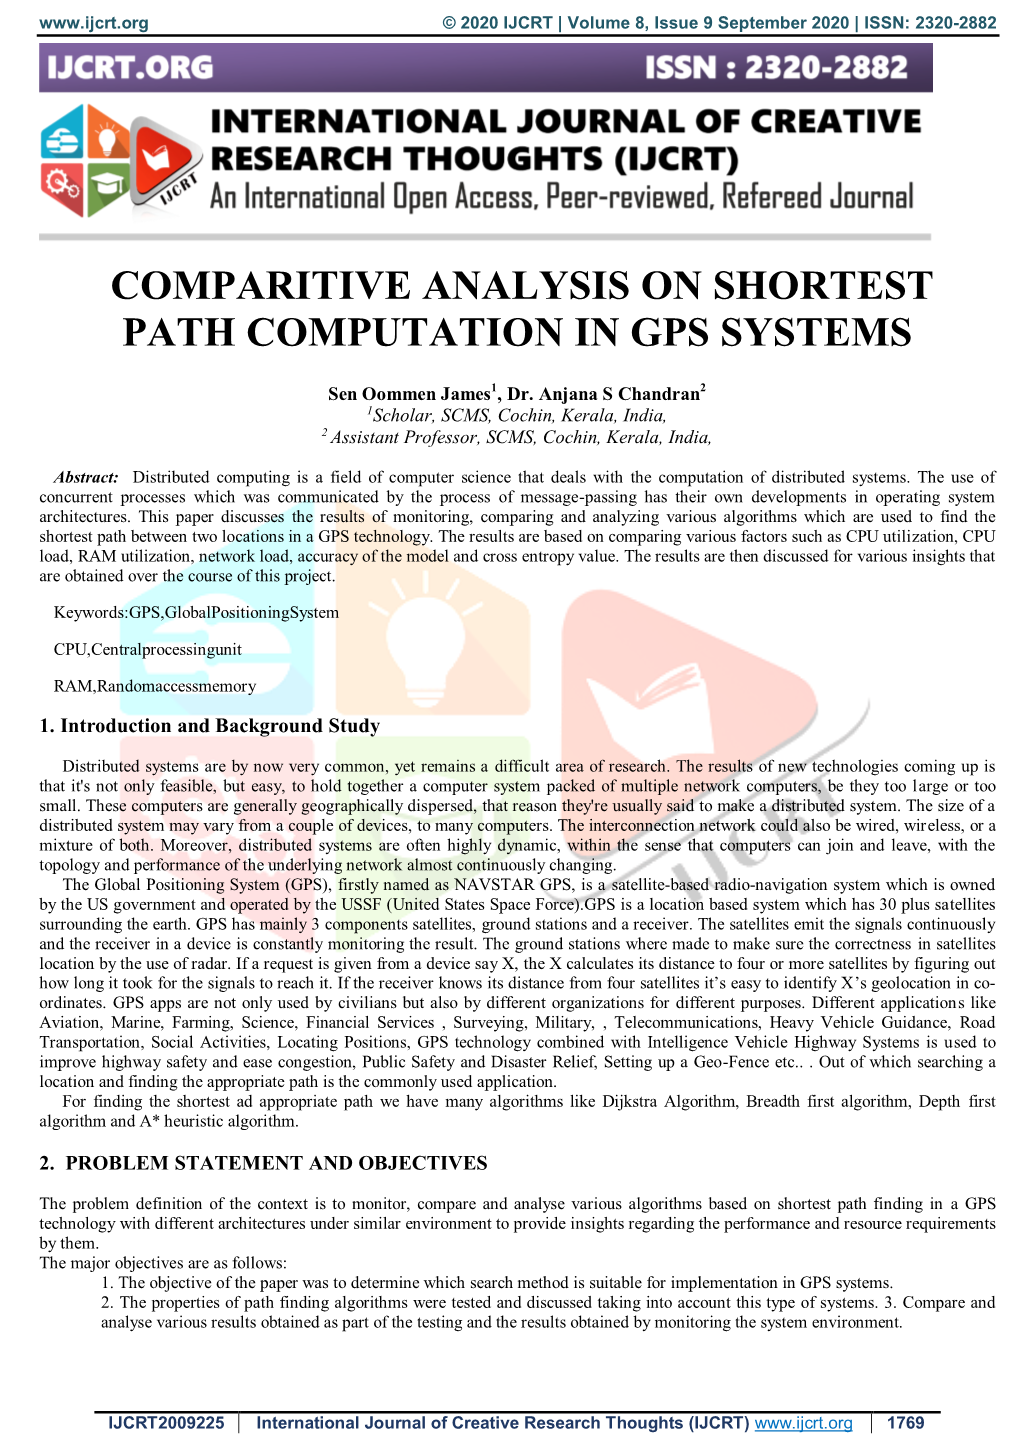 Comparitive Analysis on Shortest Path Computation in Gps Systems